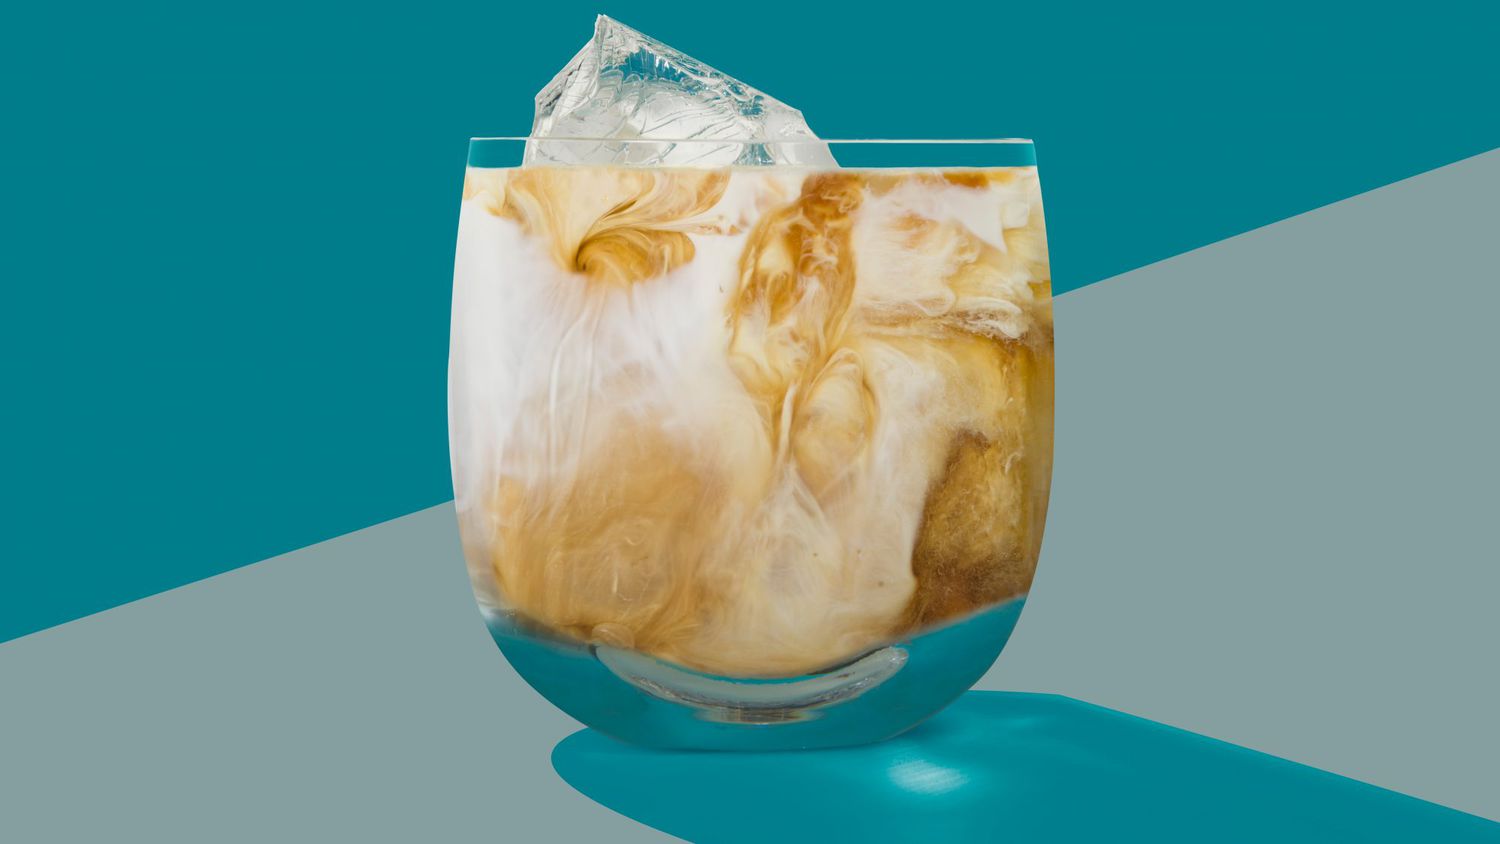 How to Make a White Russian, the Deliciously Decadent Cocktail That Only Requires 3 Ingredients 